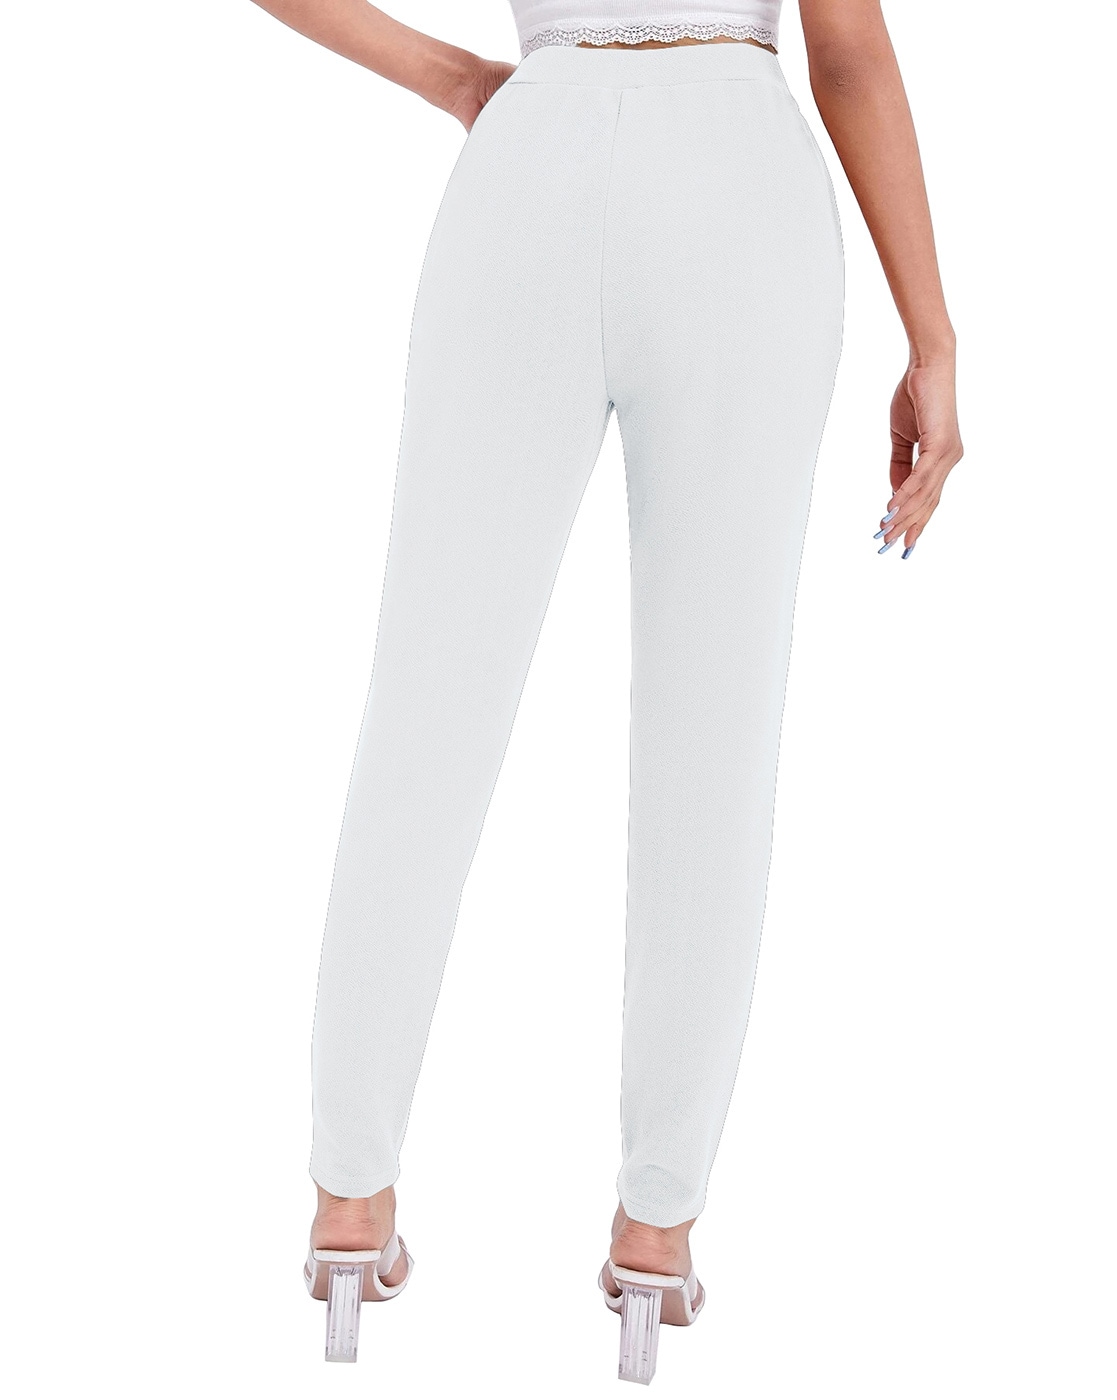 Womens High Waisted Pants - Buy Womens High Waisted Pants online at Best  Prices in India | Flipkart.com